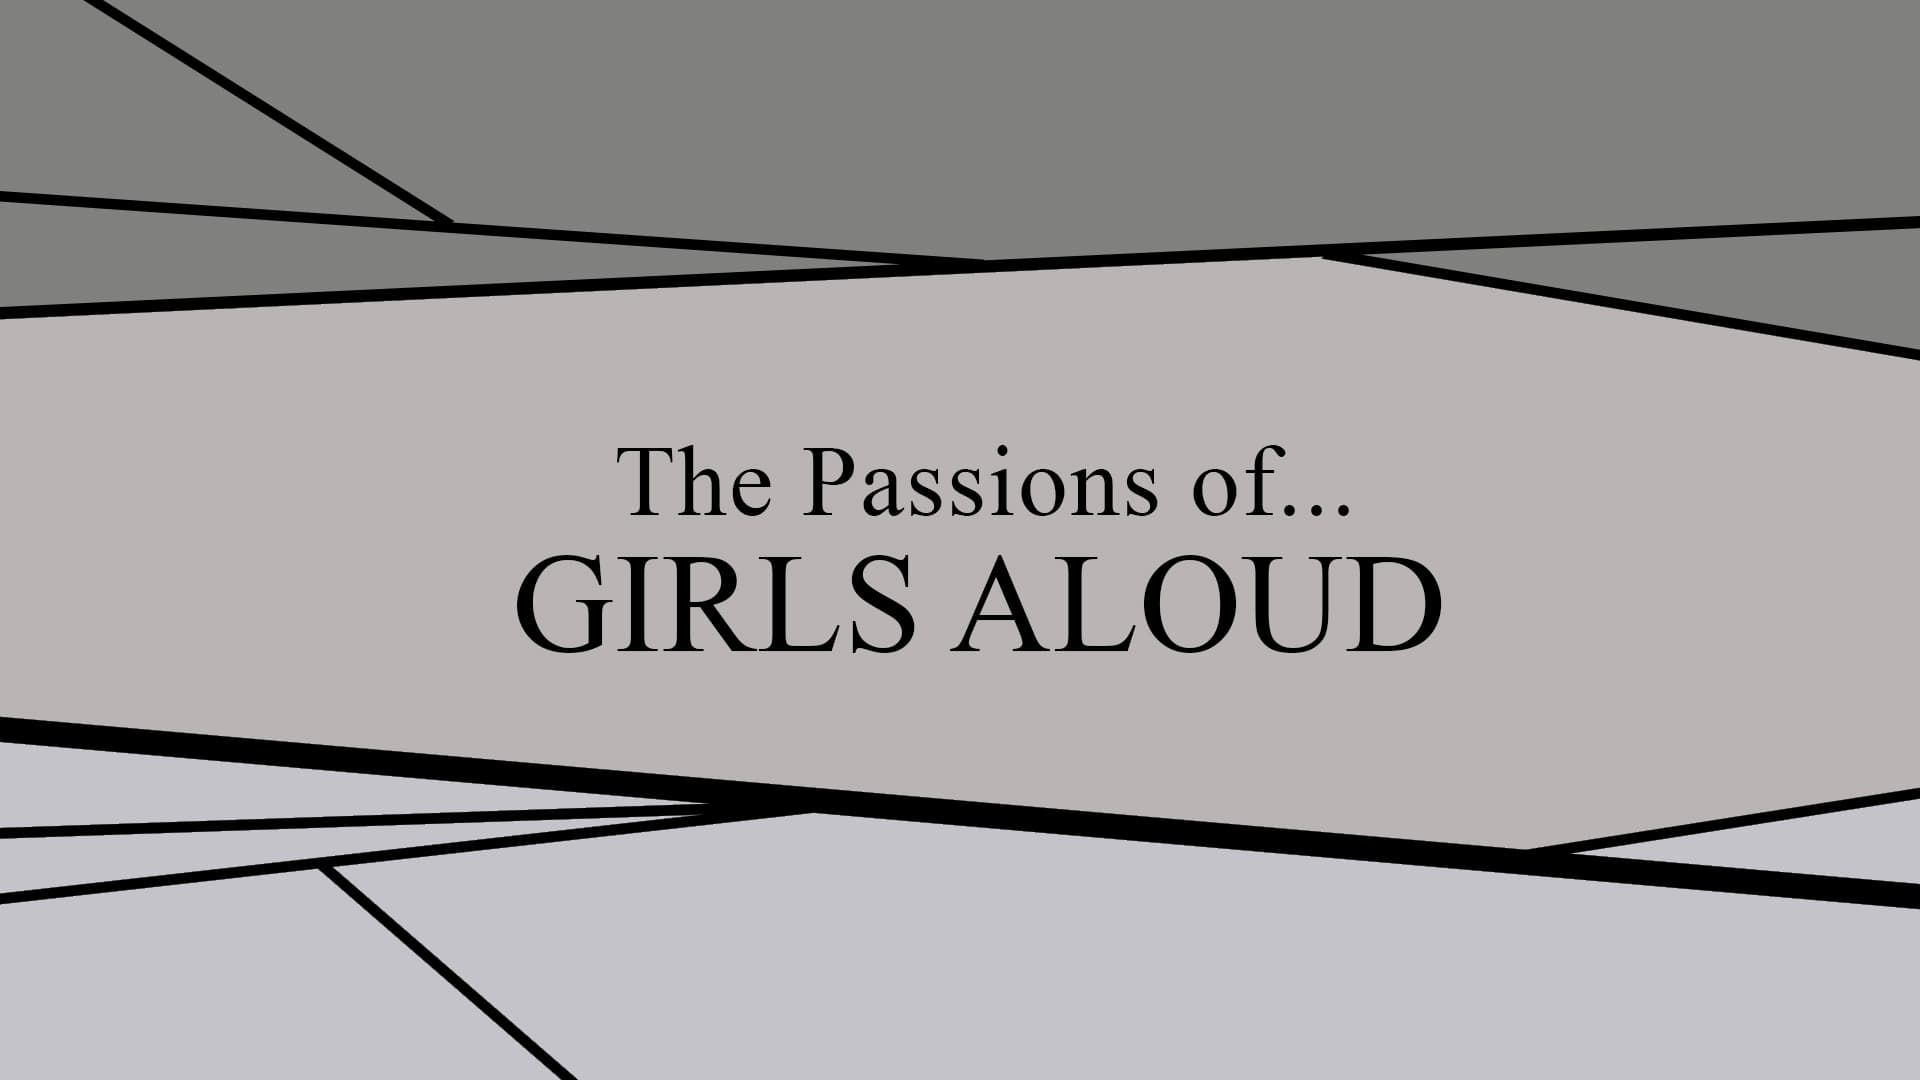 The Passions of... Girls Aloud background